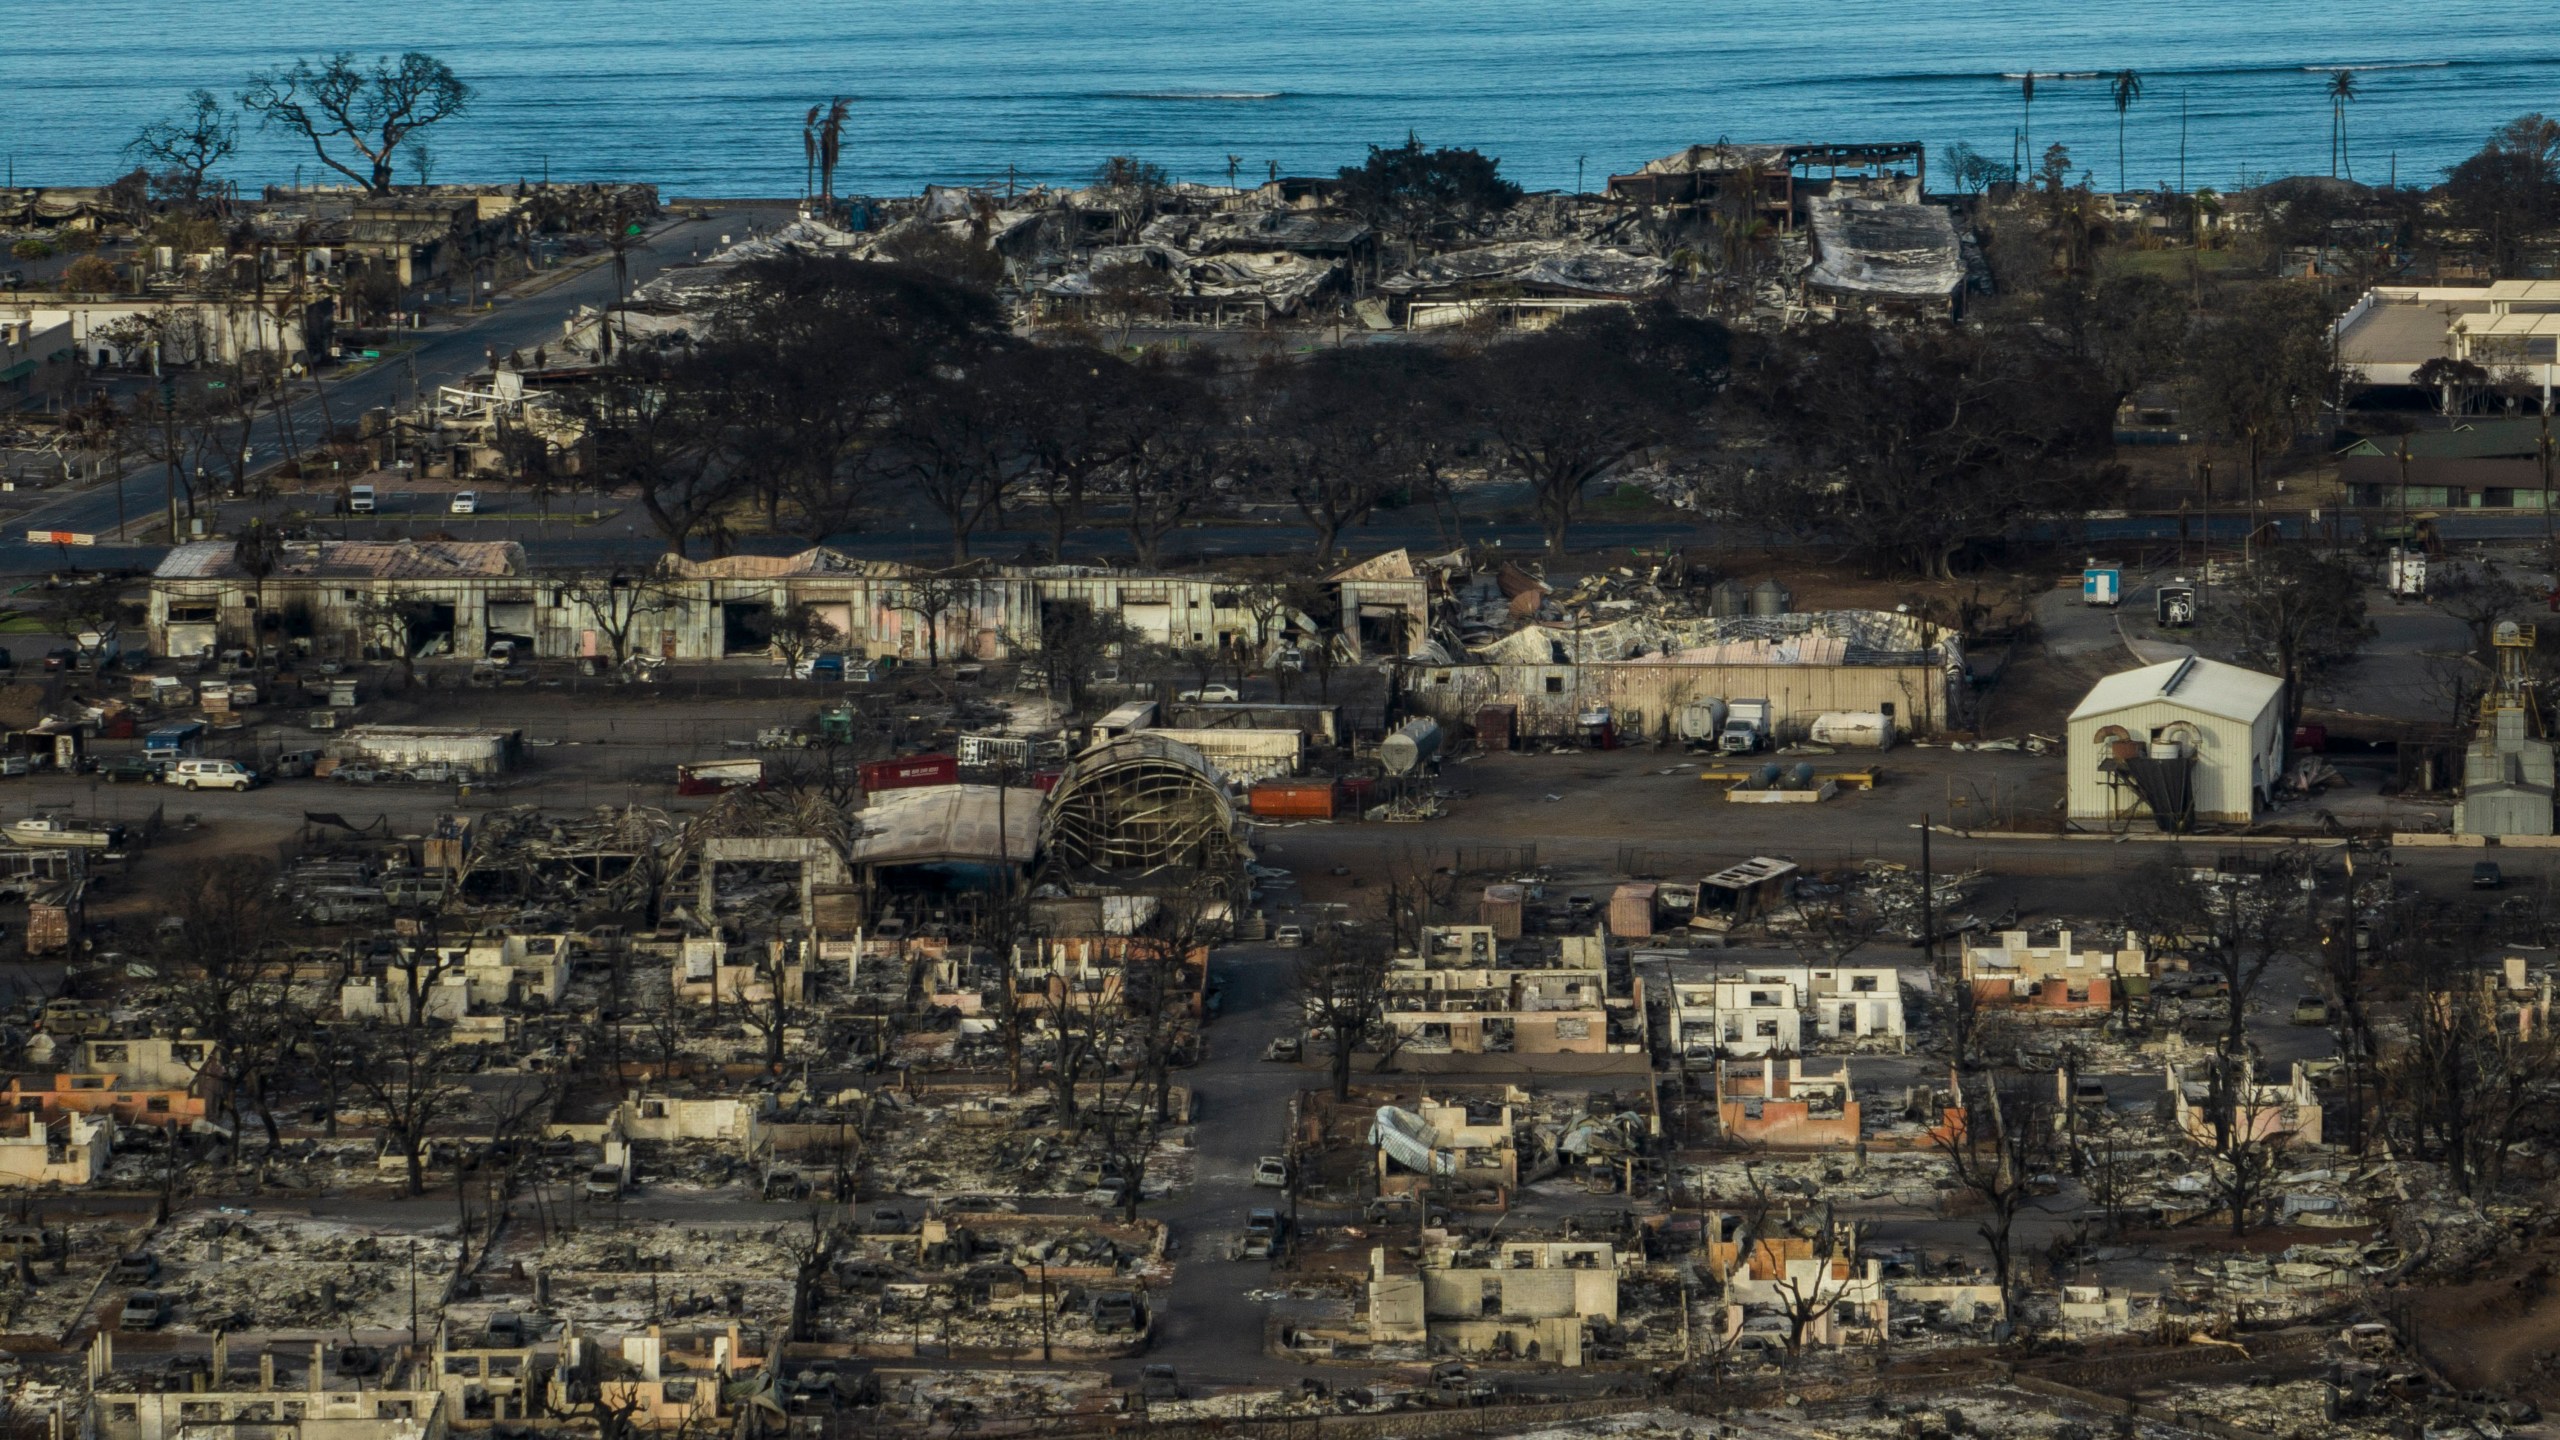 A general view shows the aftermath of a wildfire in Lahaina on the Hawaiian island of Maui, Thursday, Aug. 17, 2023. (AP Photo/Jae C. Hong)